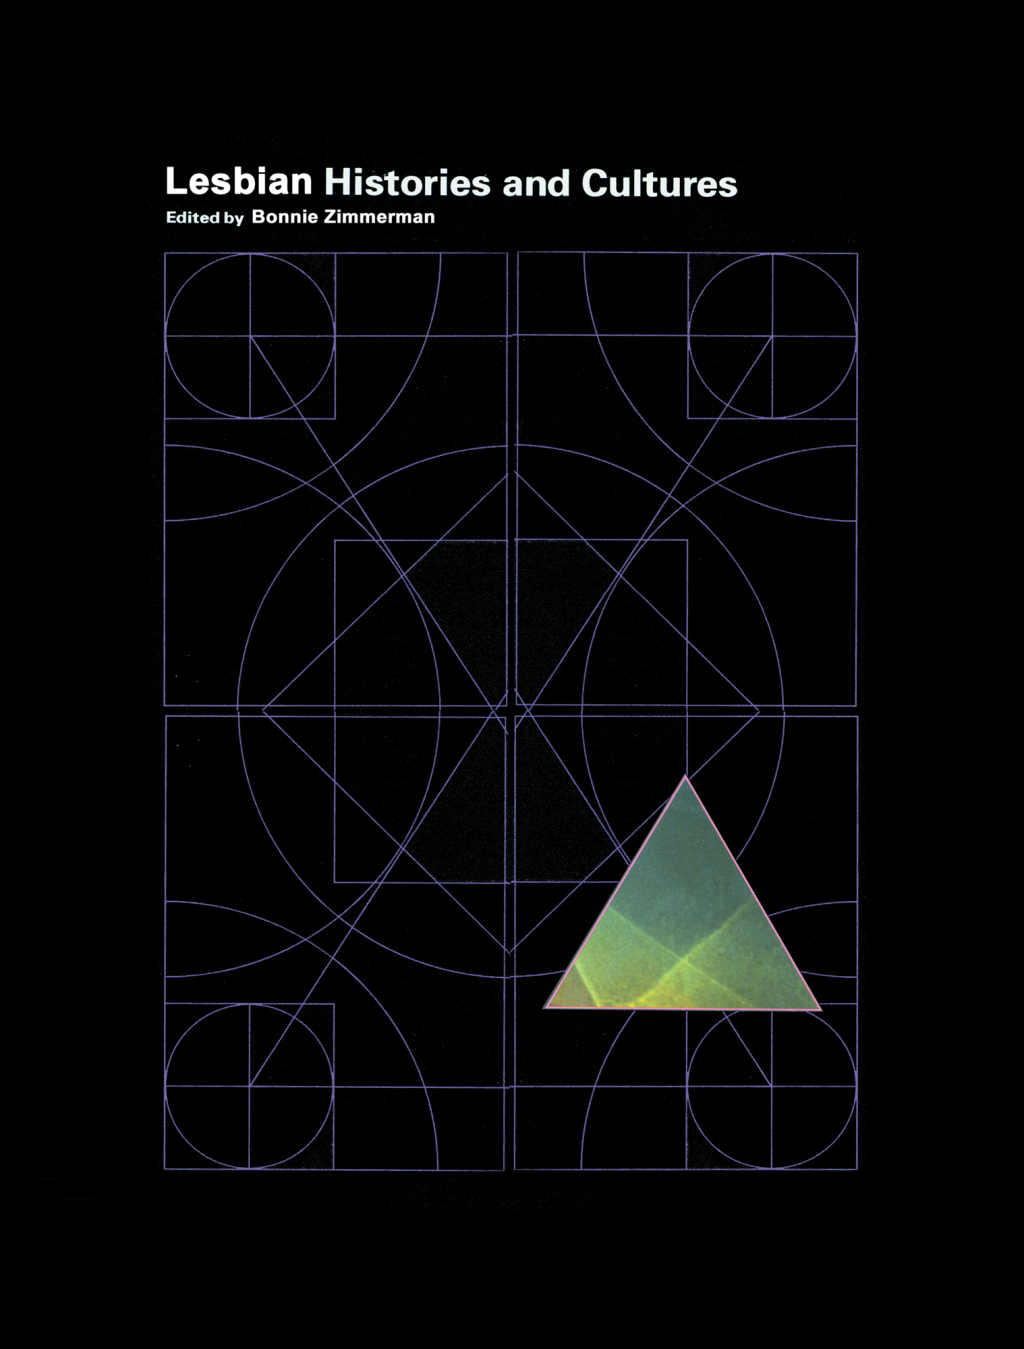 Encyclopedia of Lesbian Histories and Cultures - 1st Edition (eBook Rental)